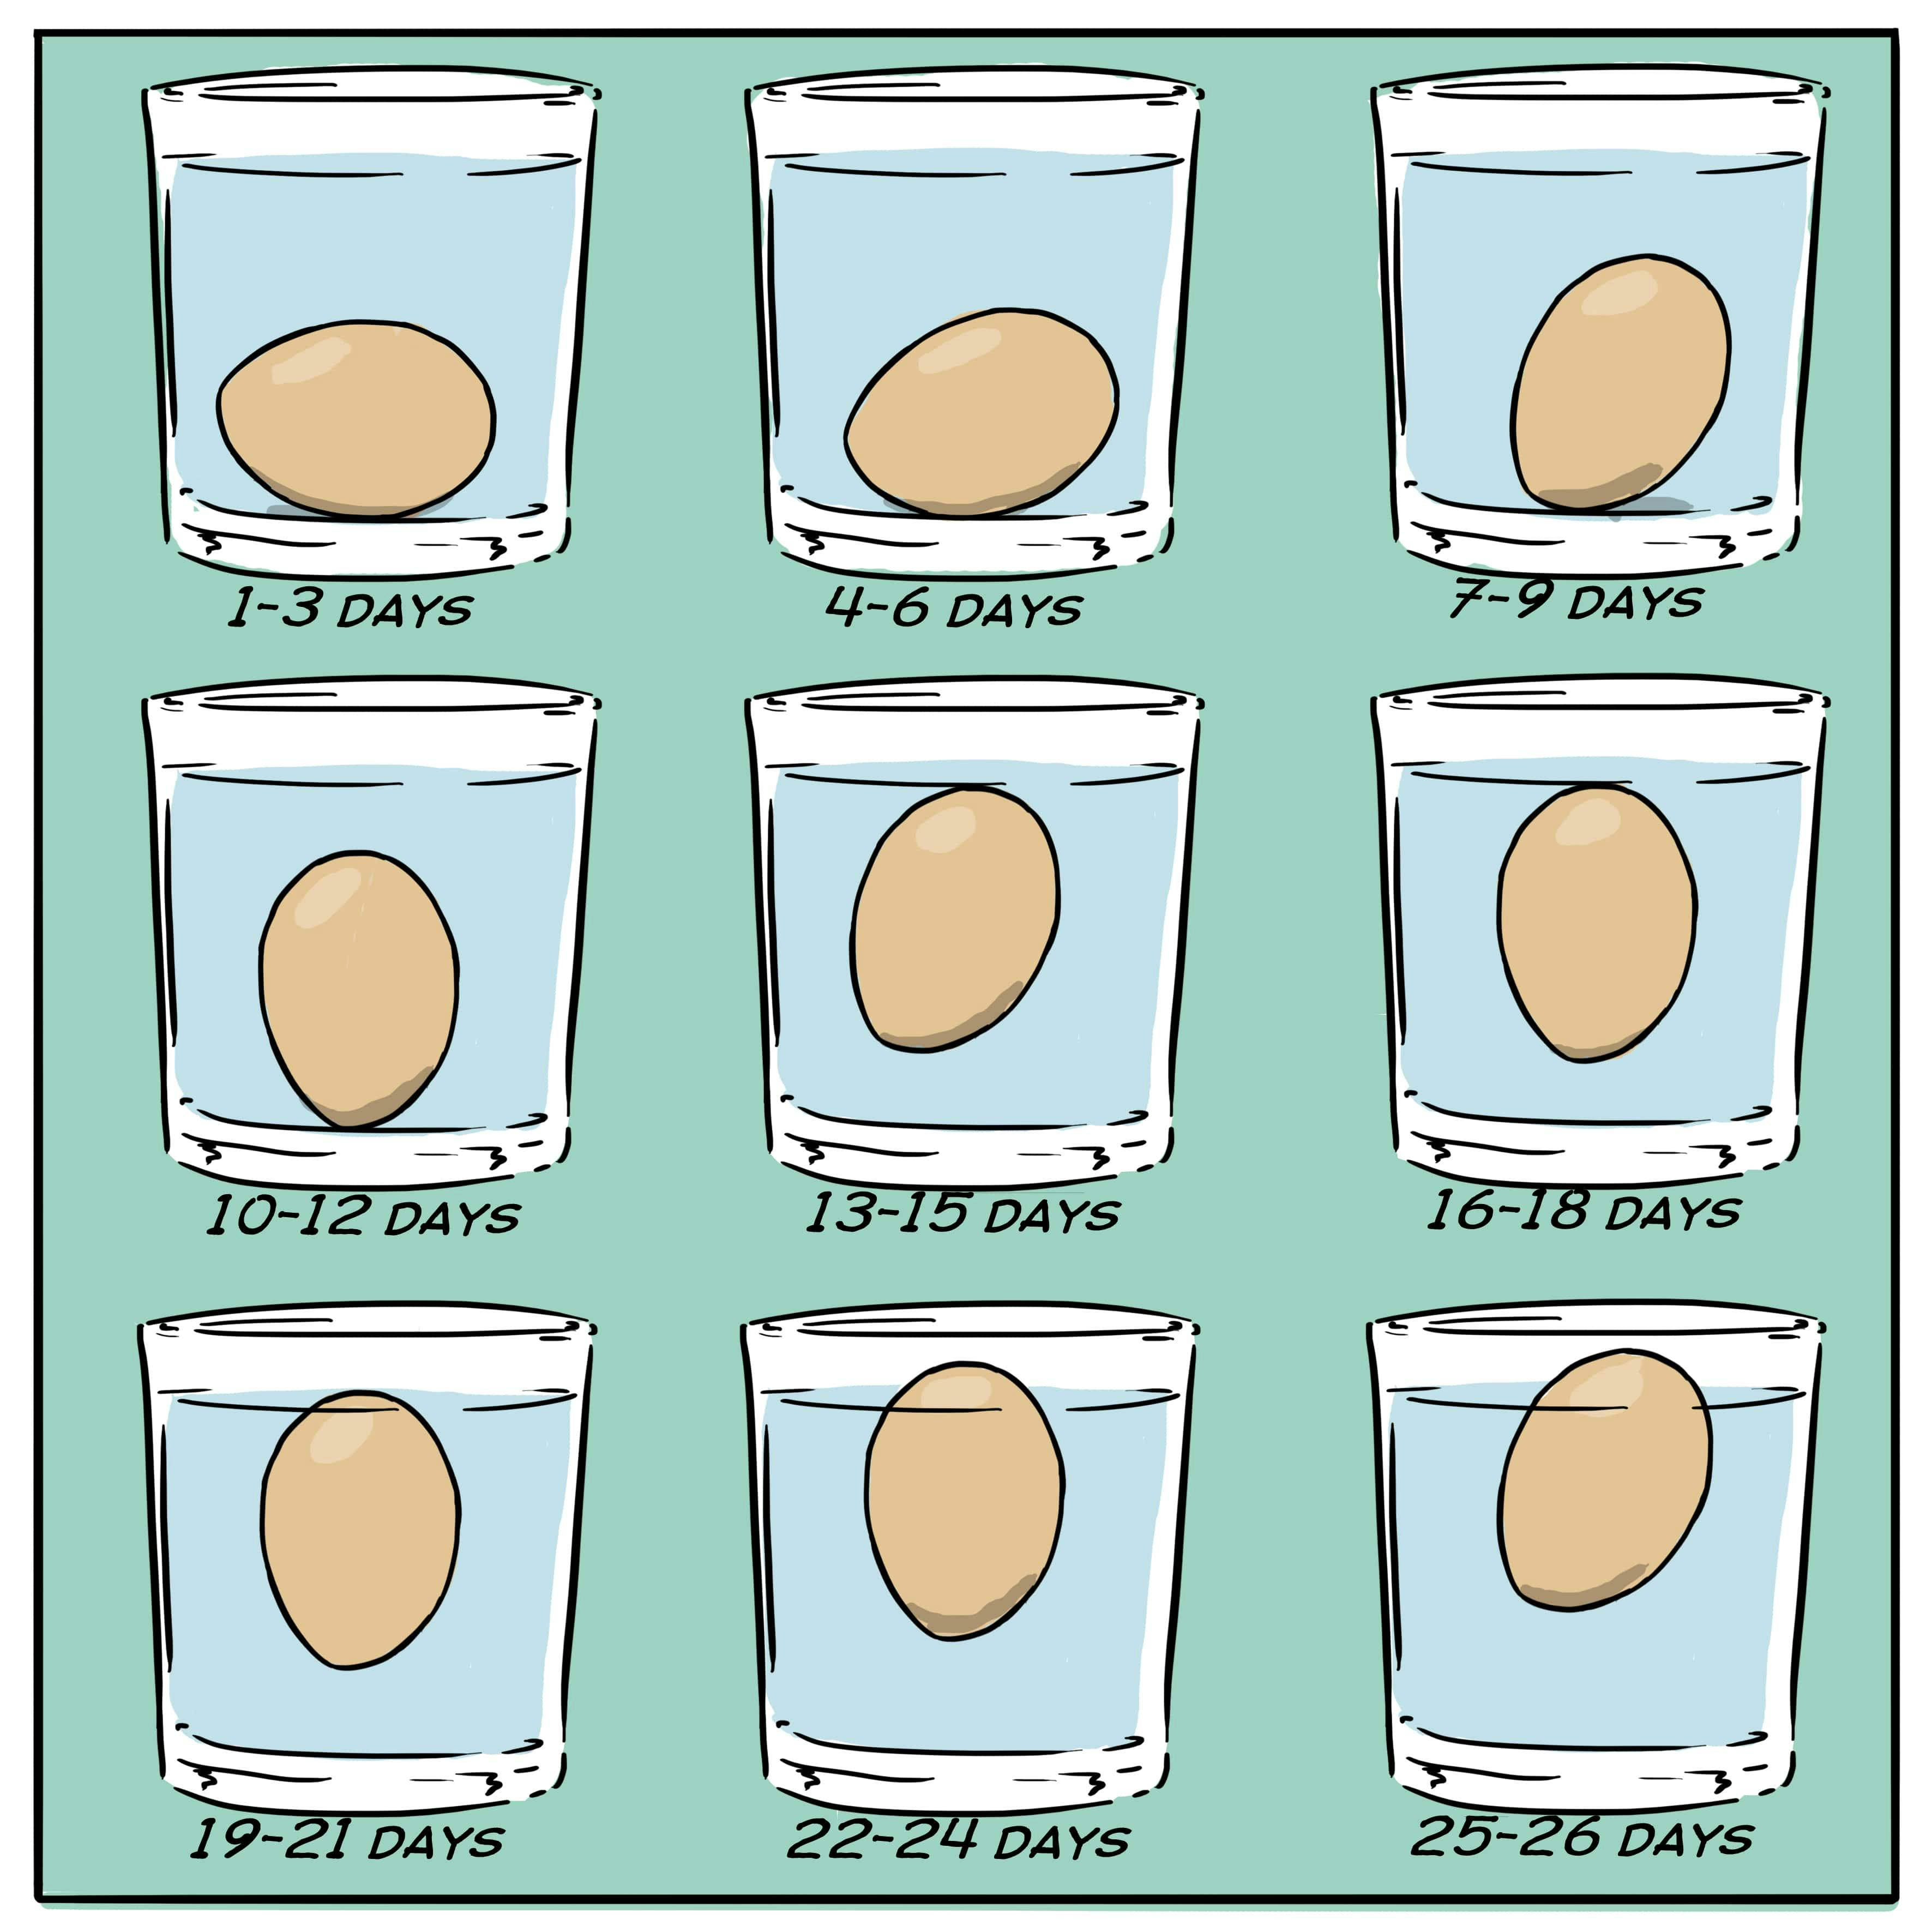 A glass of water with eggs of various freshness levels, from fresh to expired.